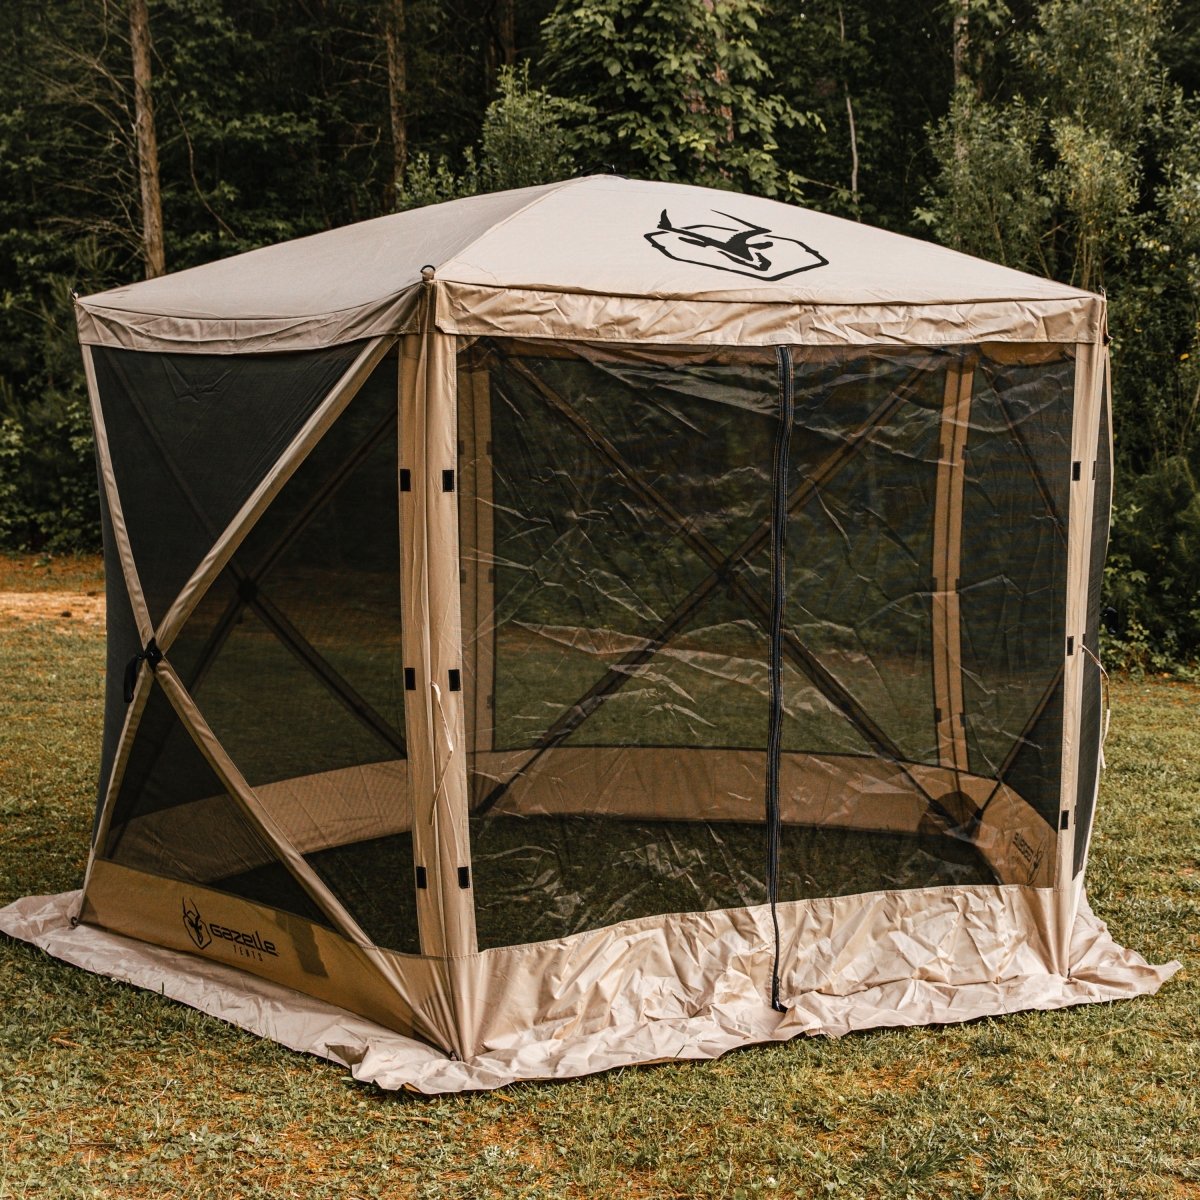 G5 5-Sided Portable Gazebo with TriTech Mesh - Overland Bound